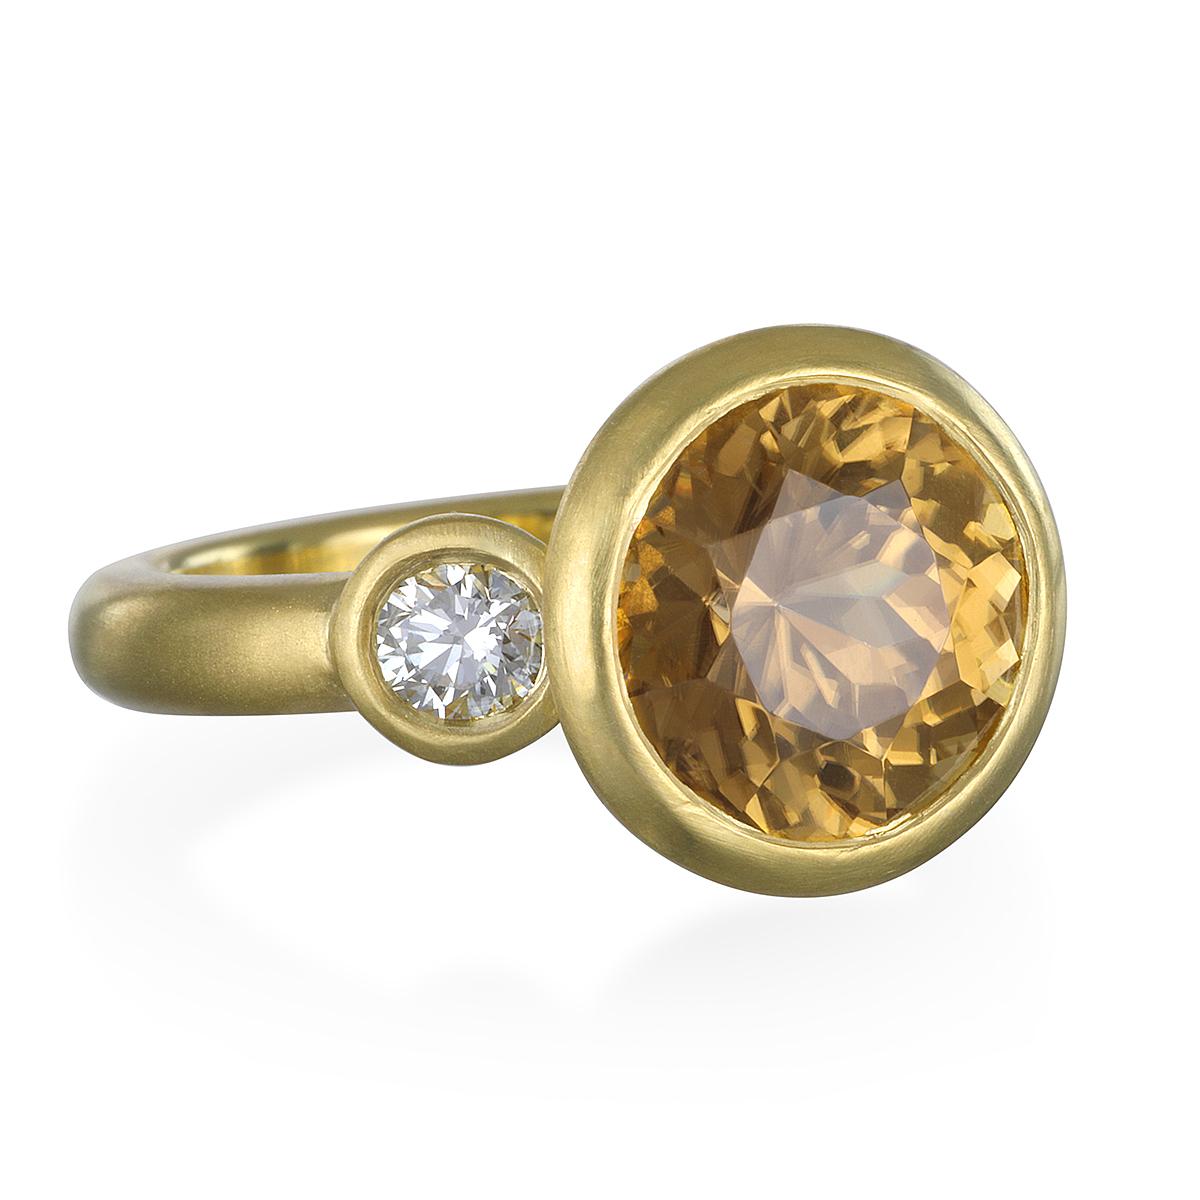 One of a kind and unique.
Zircon is a colorful gem with high refraction and fire. Evident in this Champagne-hued stone, set in 18k gold with bright, white diamonds. The center stone has incredible fire and sparkle, highlighted further by the bright